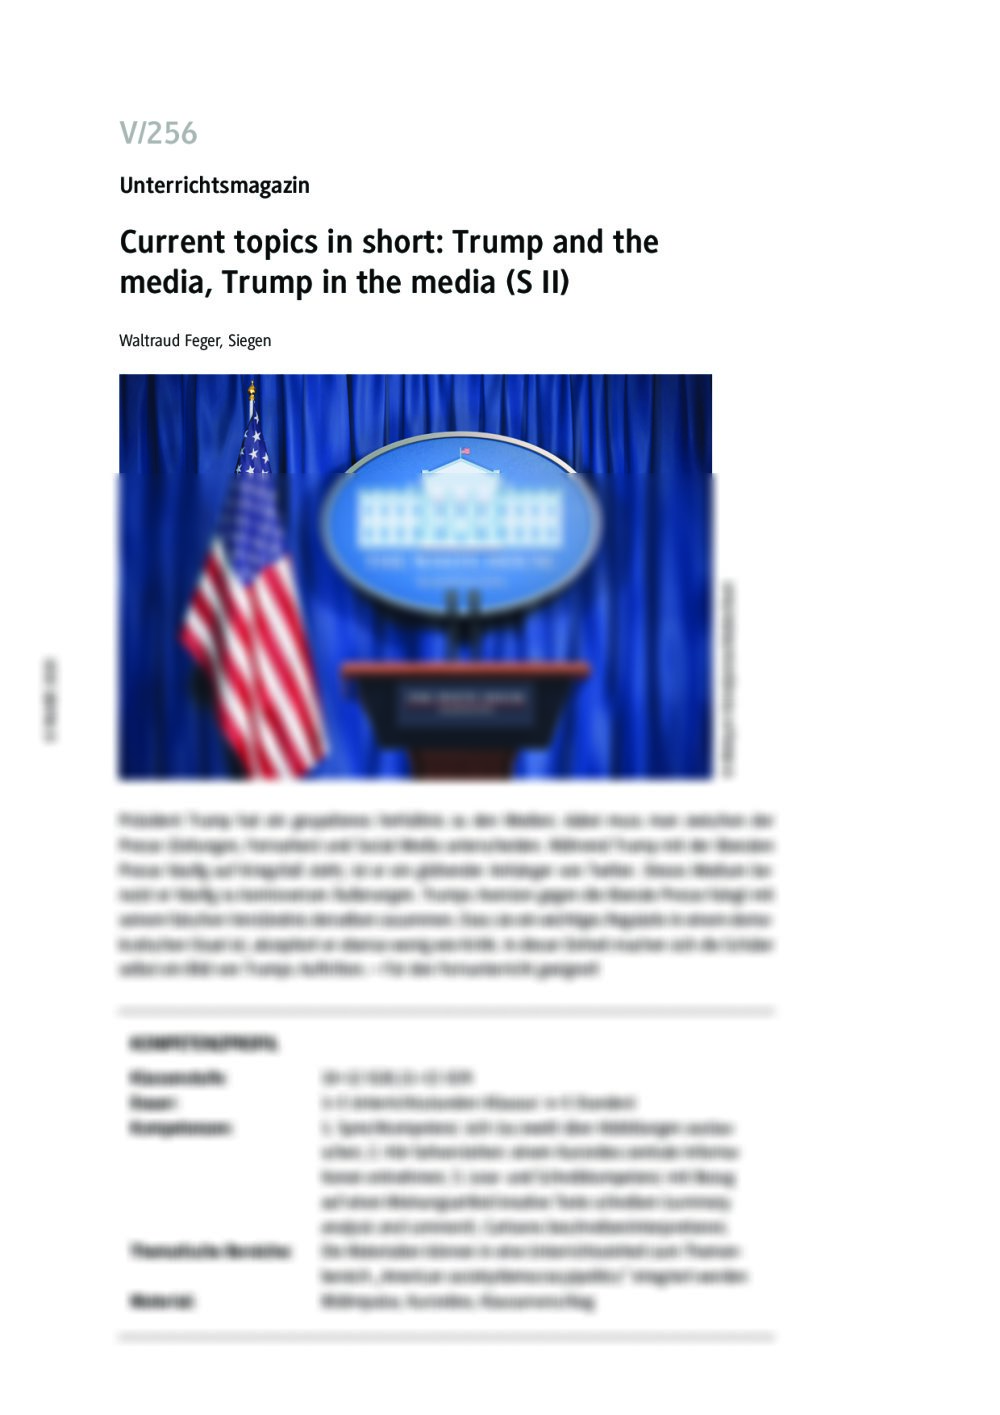 Current topics in short: Trump and the media, Trump in the media - Seite 1